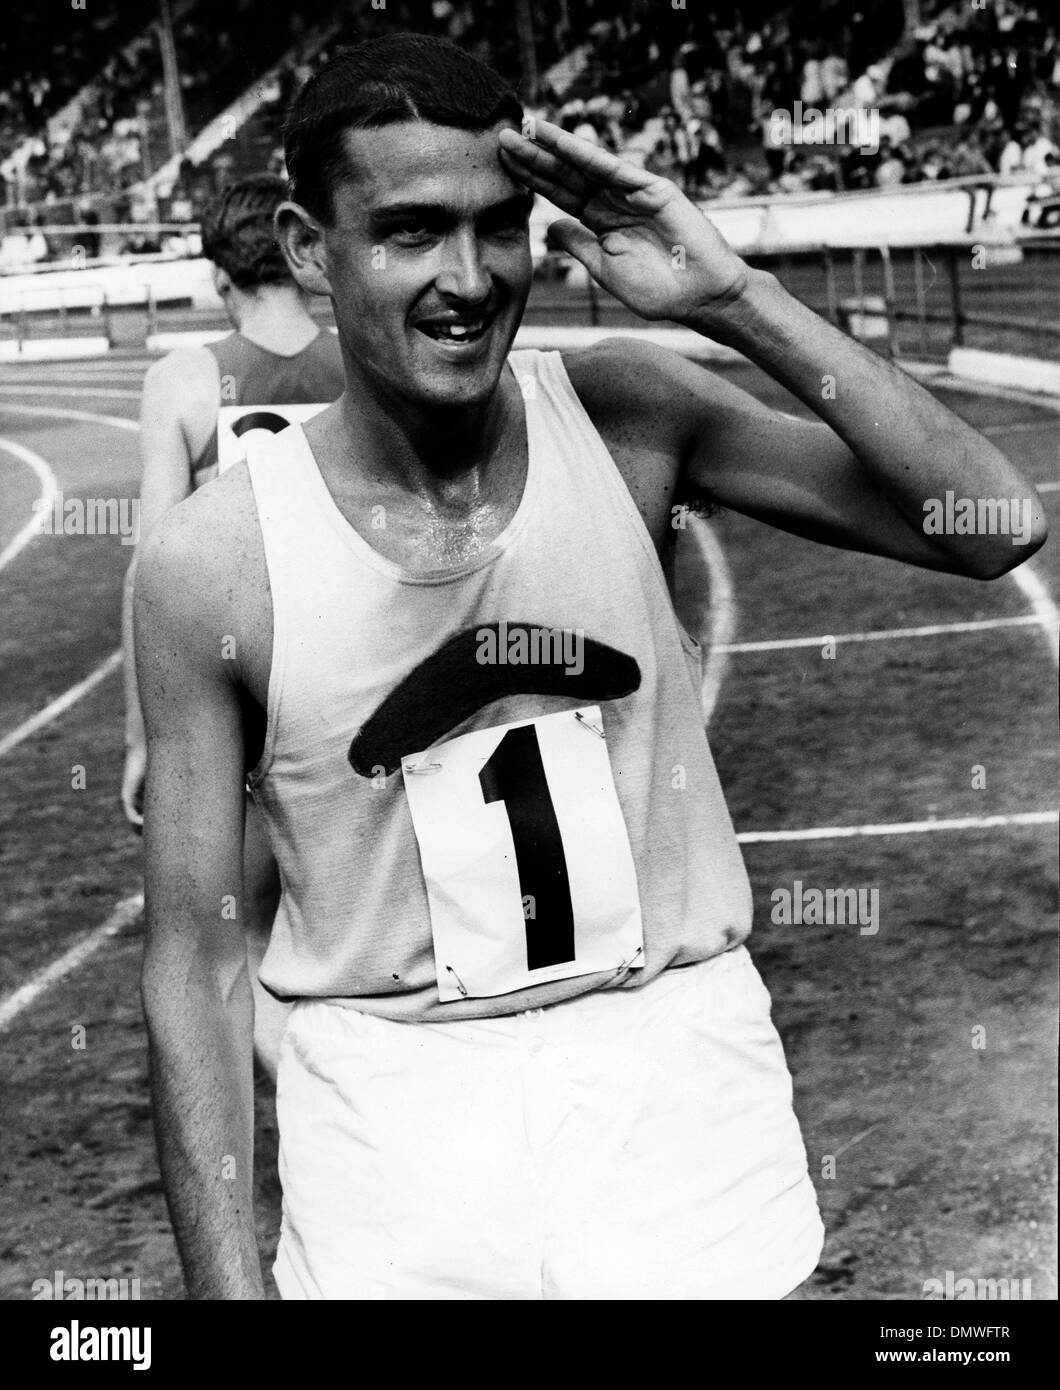 Jul 15, 1967 - London, England, UK - (File Photo) RON CLARKE (Ronald William Clarke) is an Australian athlete, and one of the best known middle and long distance runners of the 1960's. He is best remembered for setting seventeen world records. He won the bronze medal in the 10,000 m at the 1964 Summer Olympics, but never won an Olympic gold medal. At the 1968 Summer Olympics in Mex Stock Photo